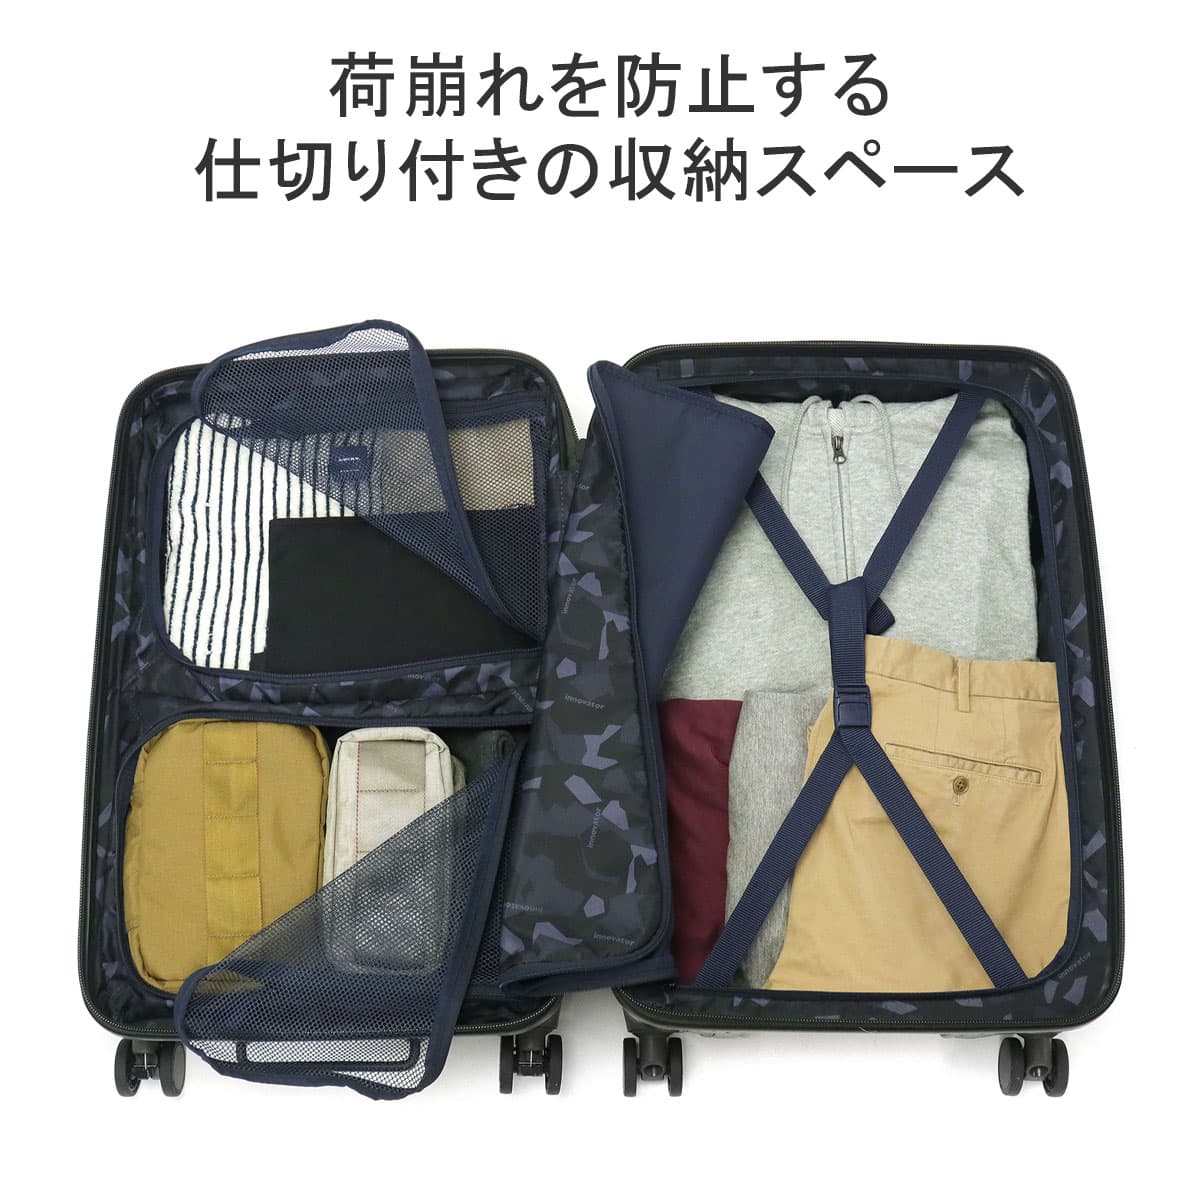 25%OFFmarc様専用 その他